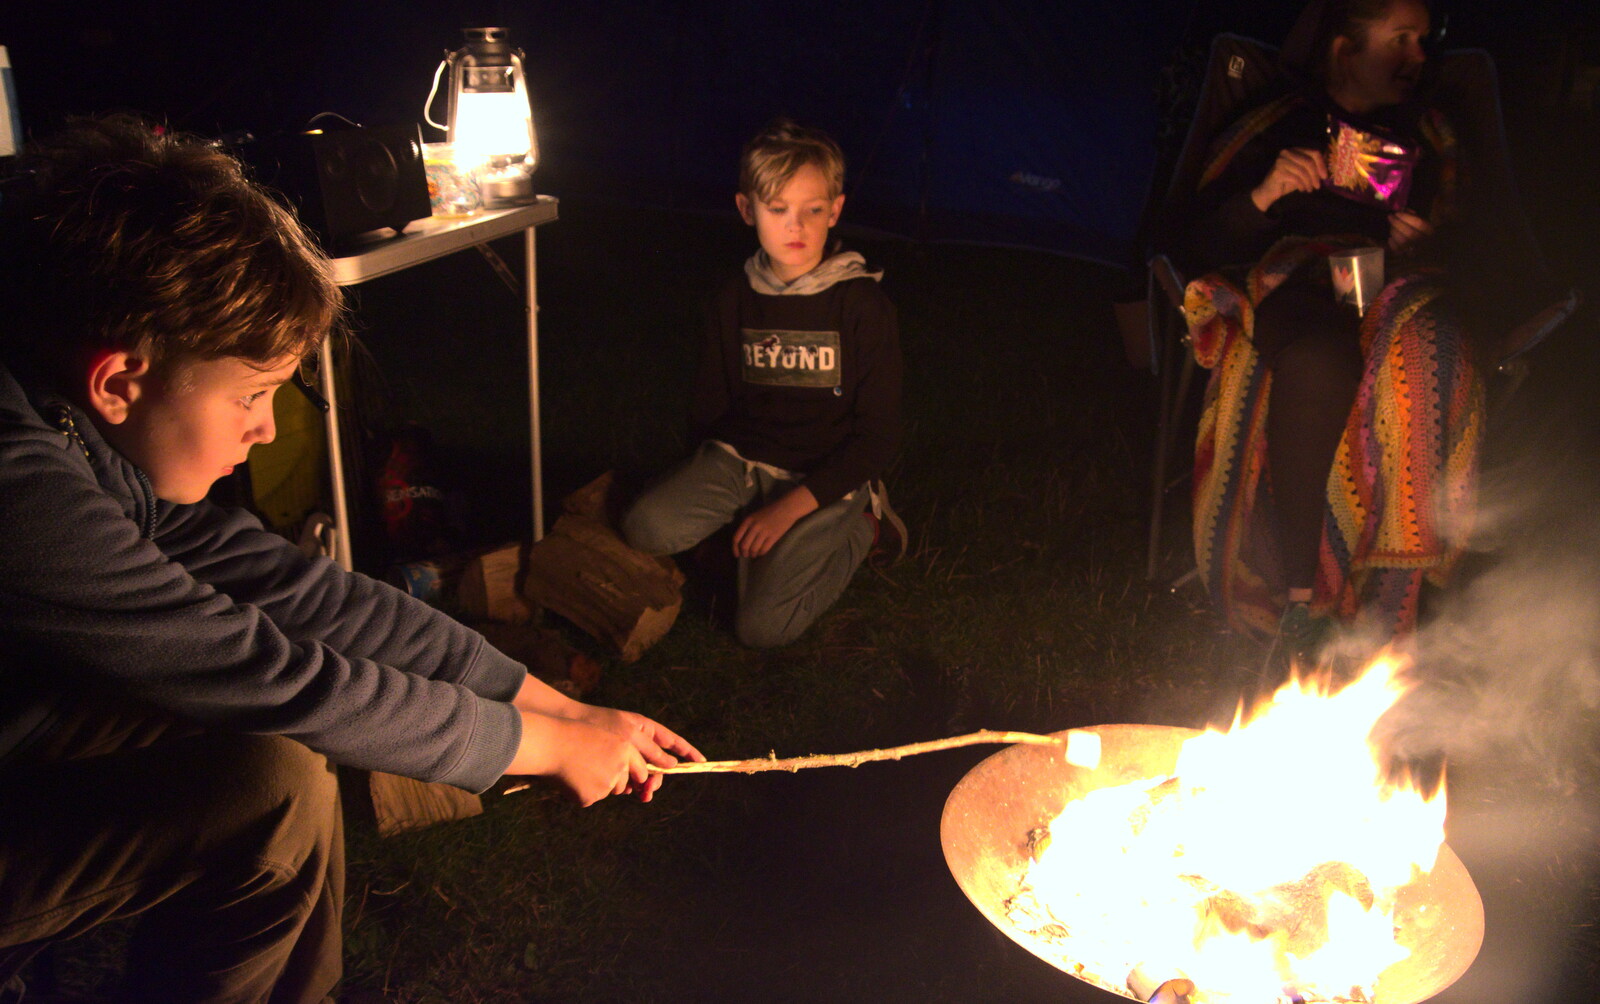 Camping at Three Rivers, Geldeston, Norfolk - 5th September 2020: It's marshmallow time again